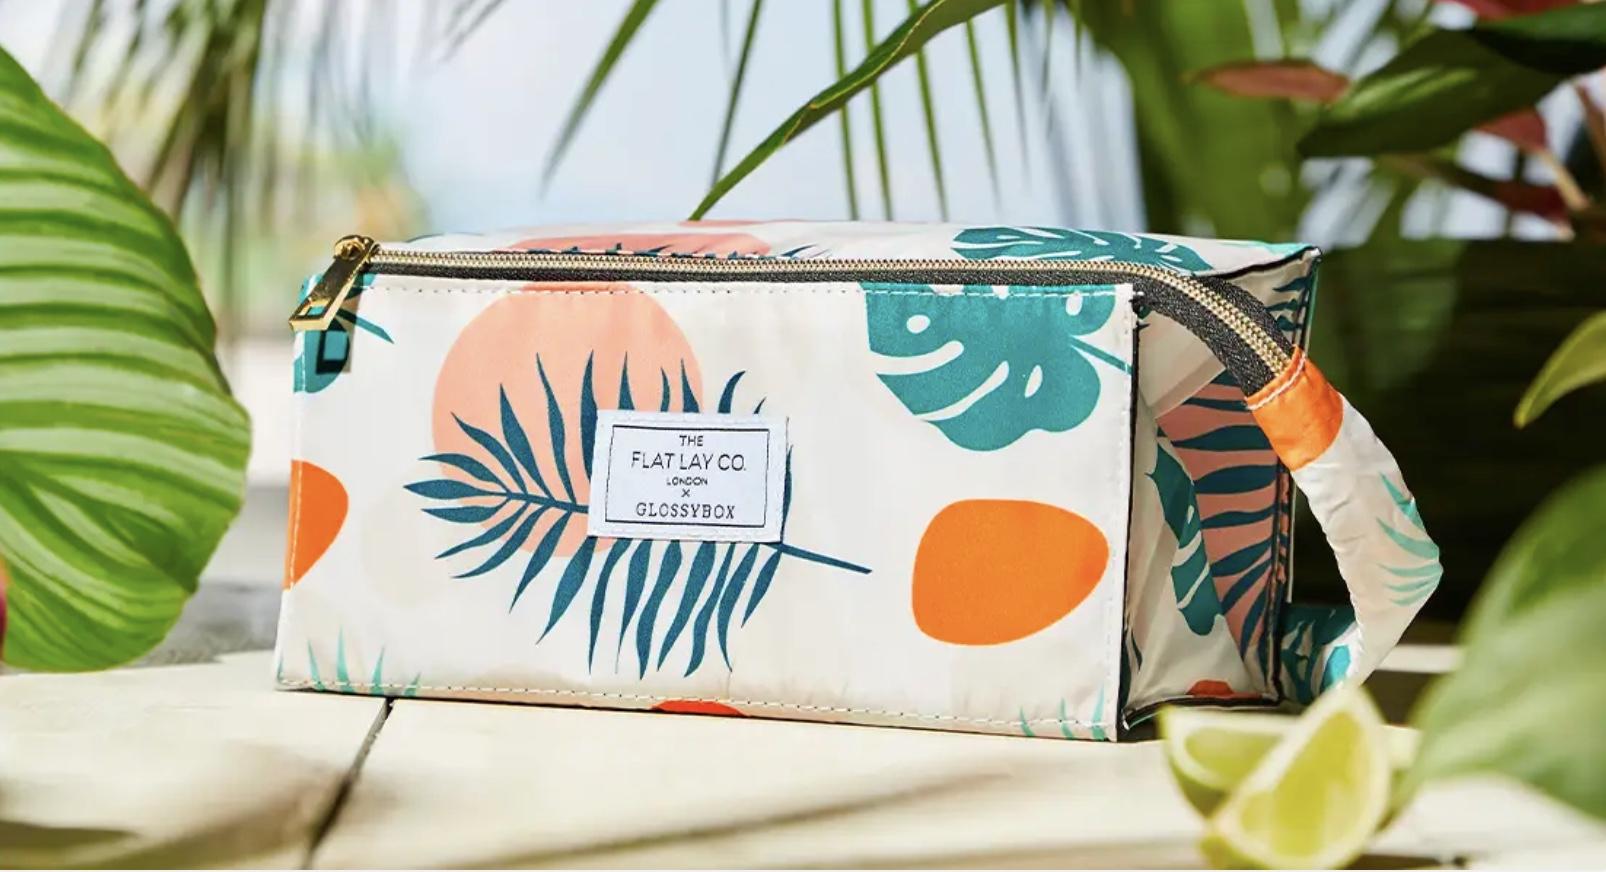 GLOSSYBOX x The Flat Lay Co. Summer Beauty Bag 2022 Spoilers!